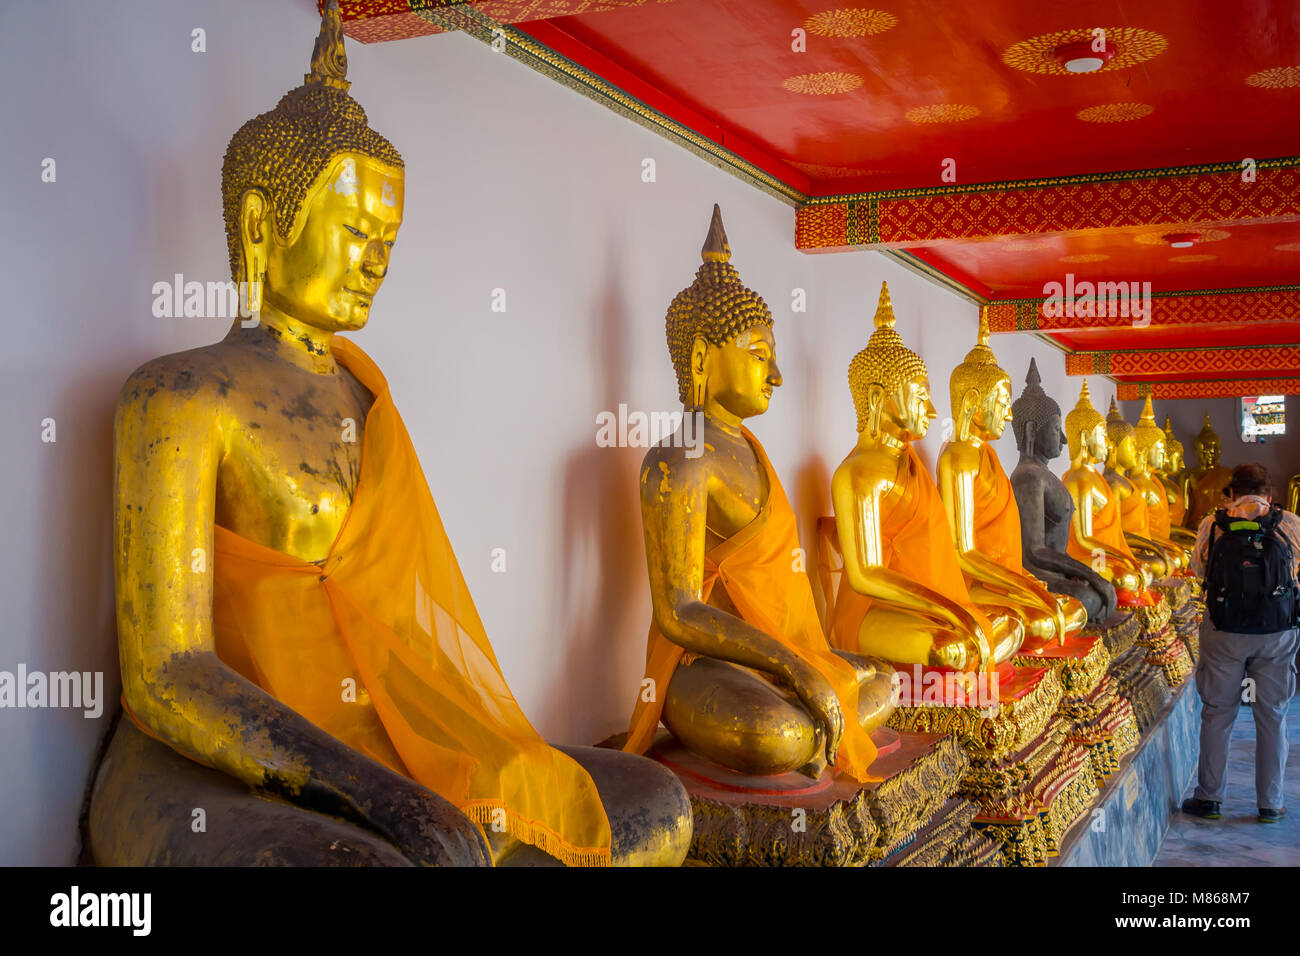 BANGKOK, THAILAND, FEBRUARY 08, 2018: Indoor view of unidentified people close to a golden Buddha Statues in a row in Wat Pho Temple in Thailand Stock Photo